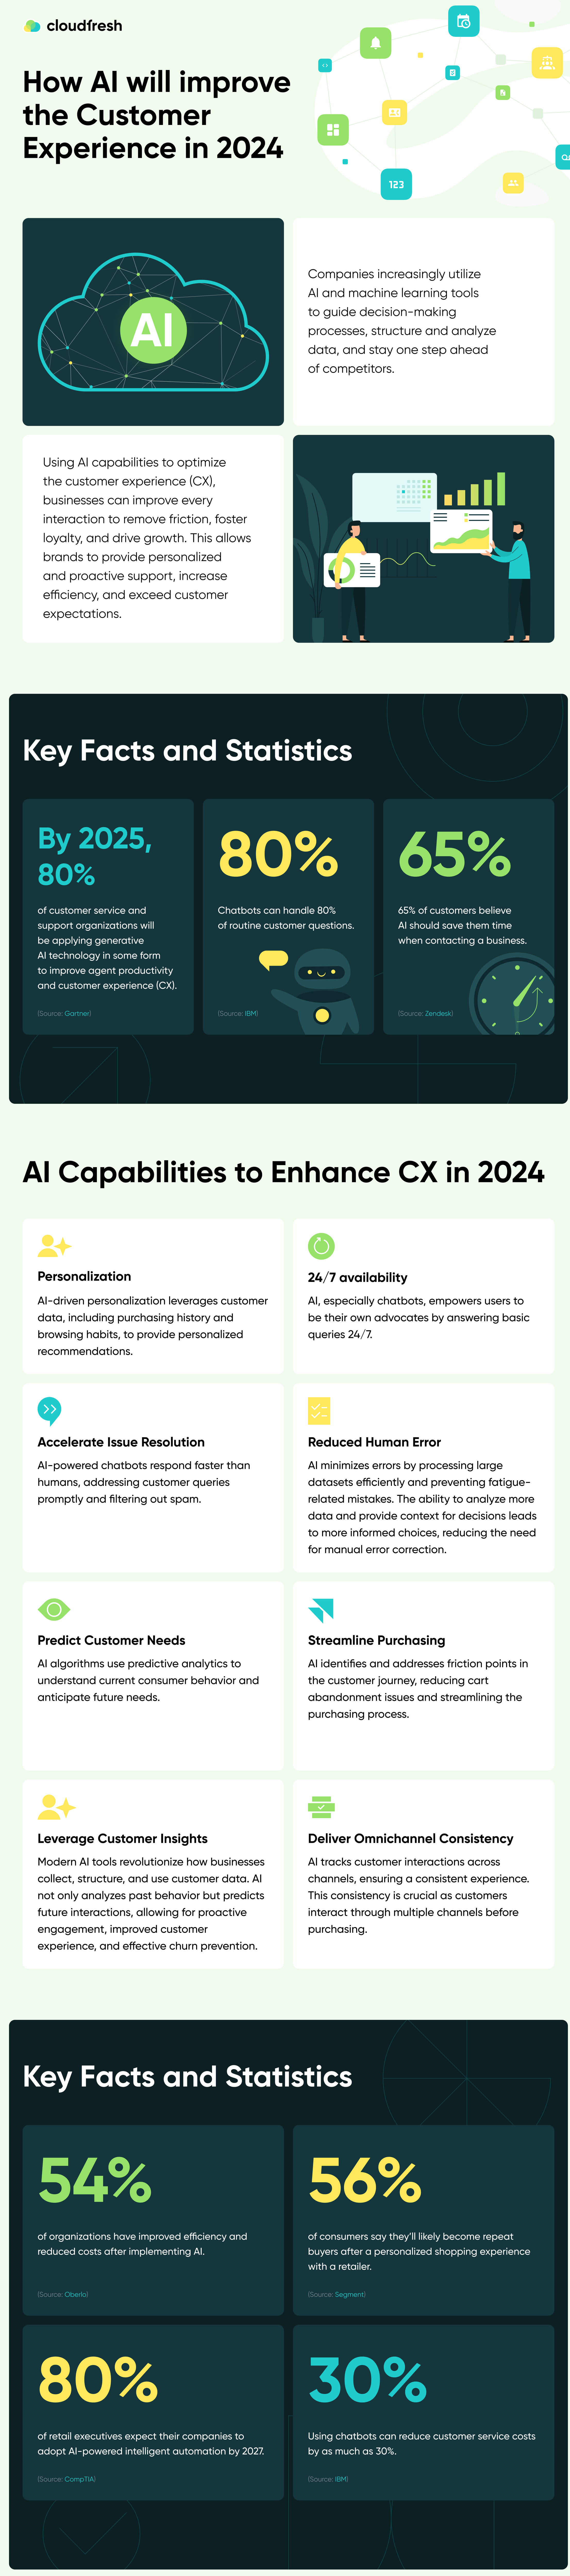 How AI will improve the Customer Experience in 2024